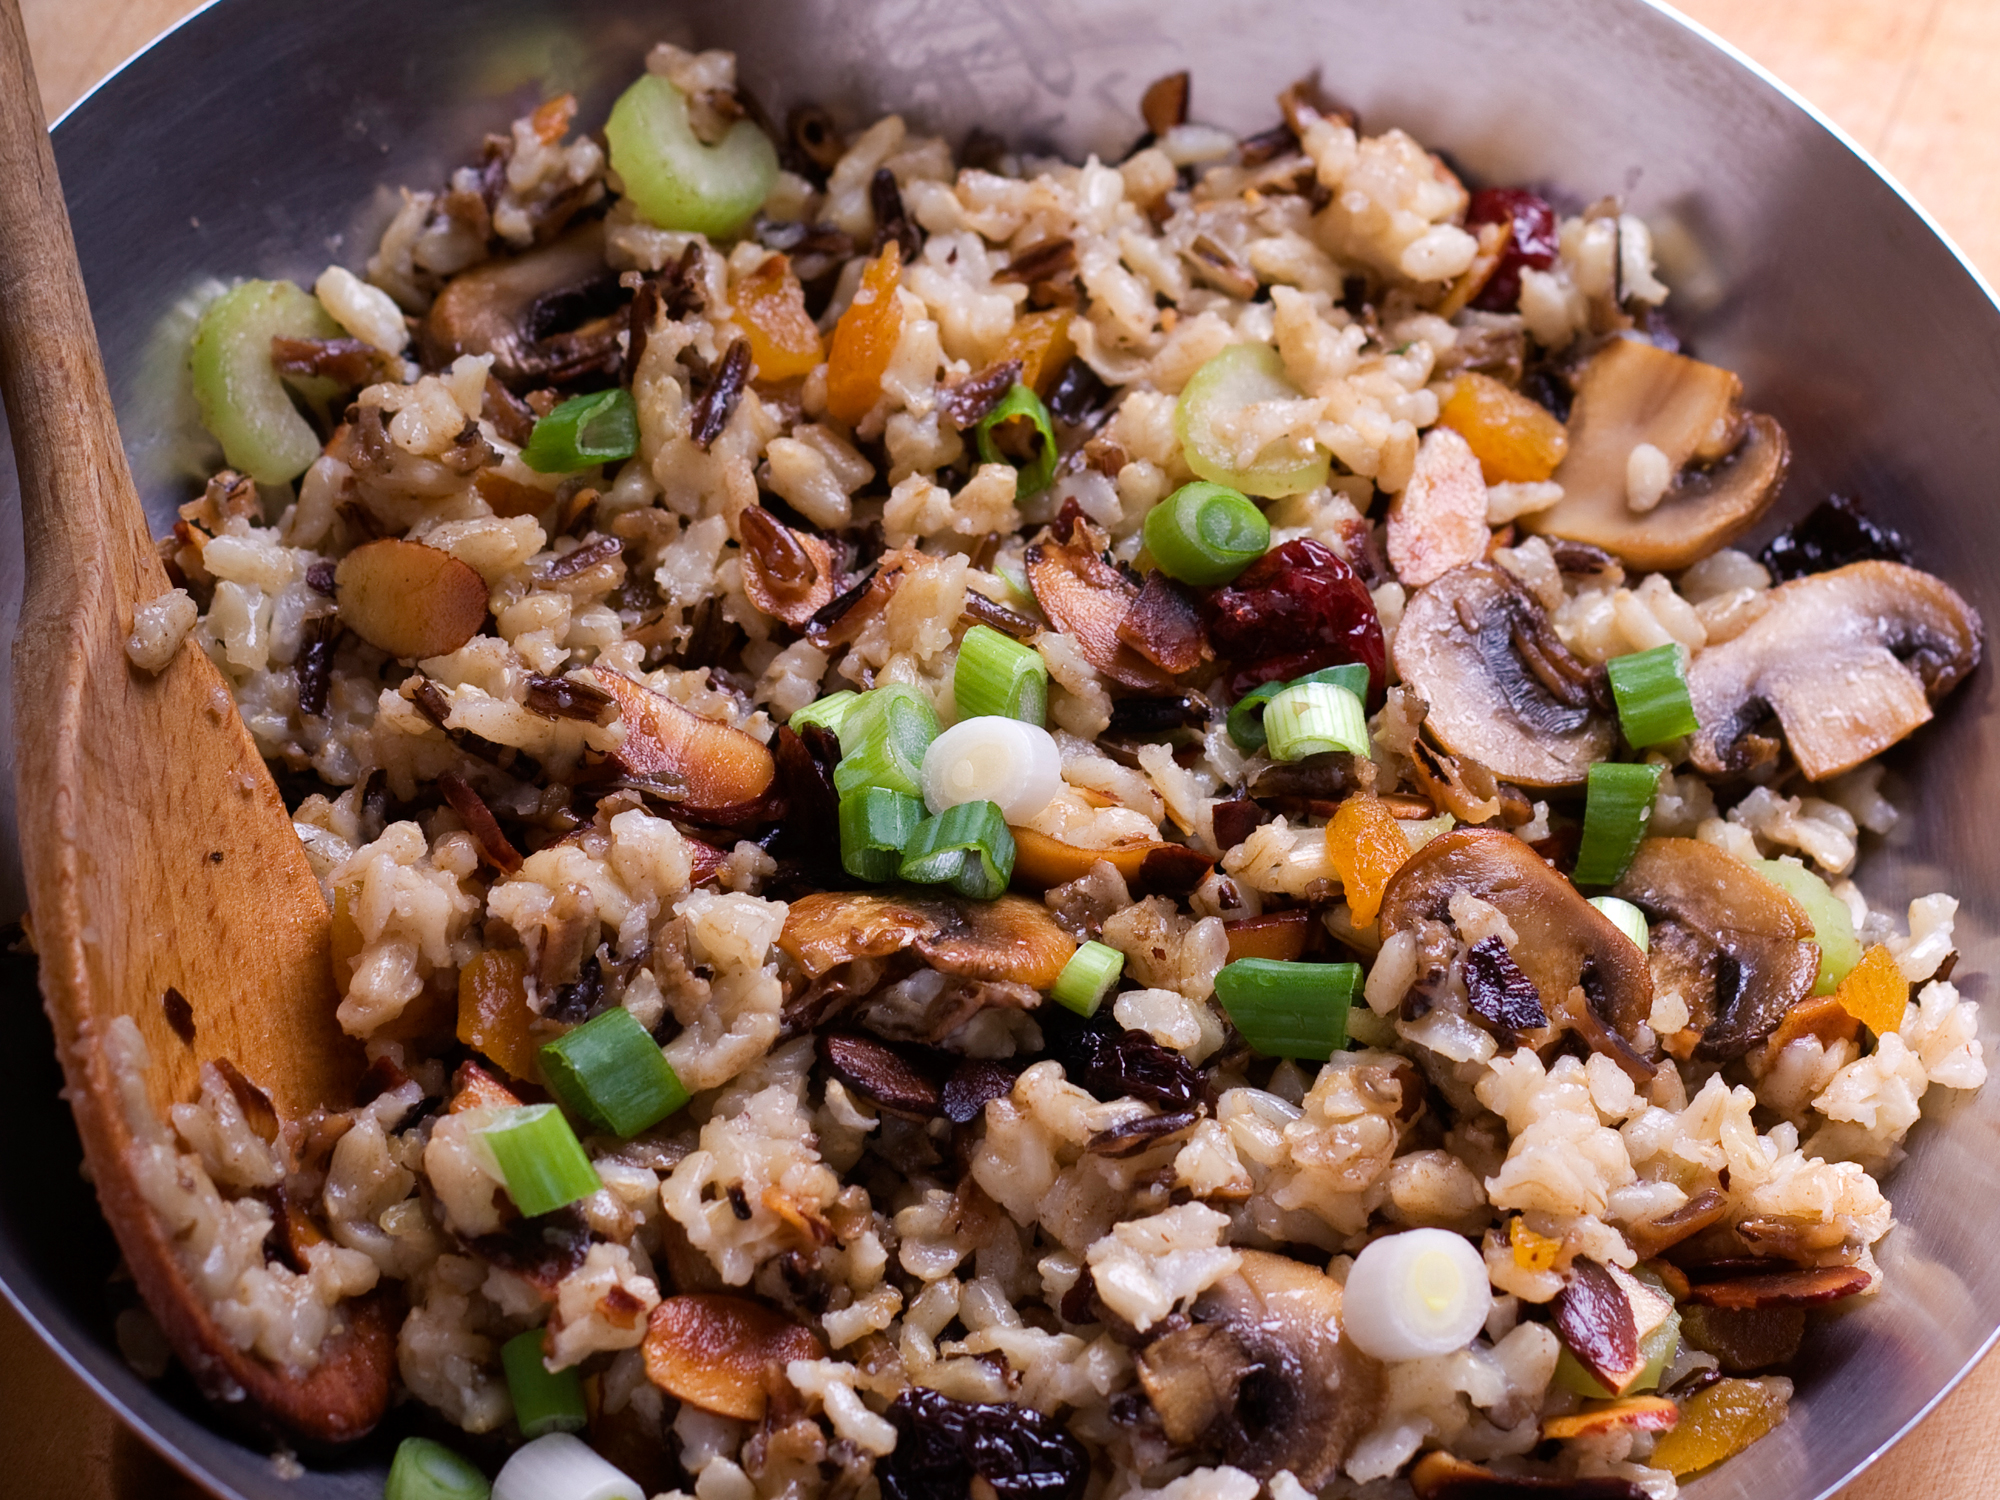 In the Kitchen with Kelley: Wild rice, almond and mushroom stuffing